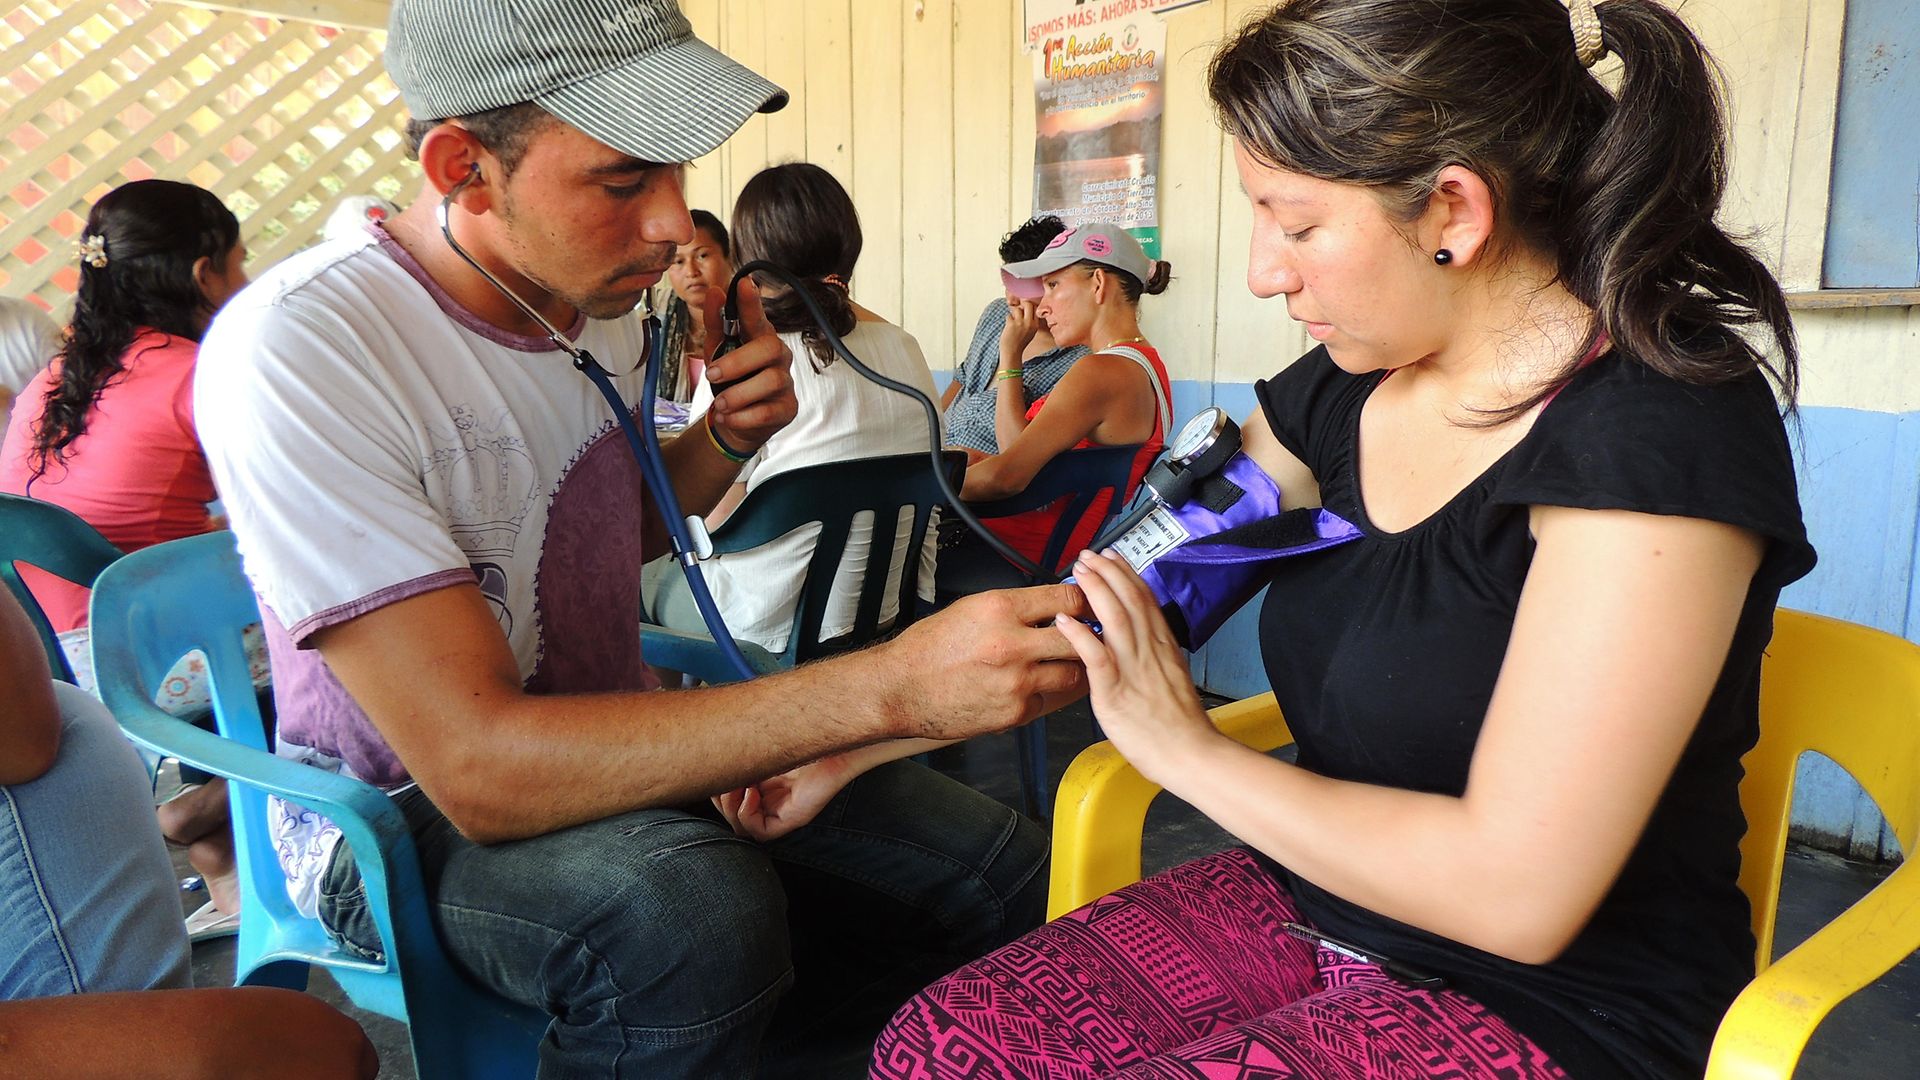 With the help of a medical student (right), a member of the Valle del Río Cimitarra community learns how to measure blood pressure.